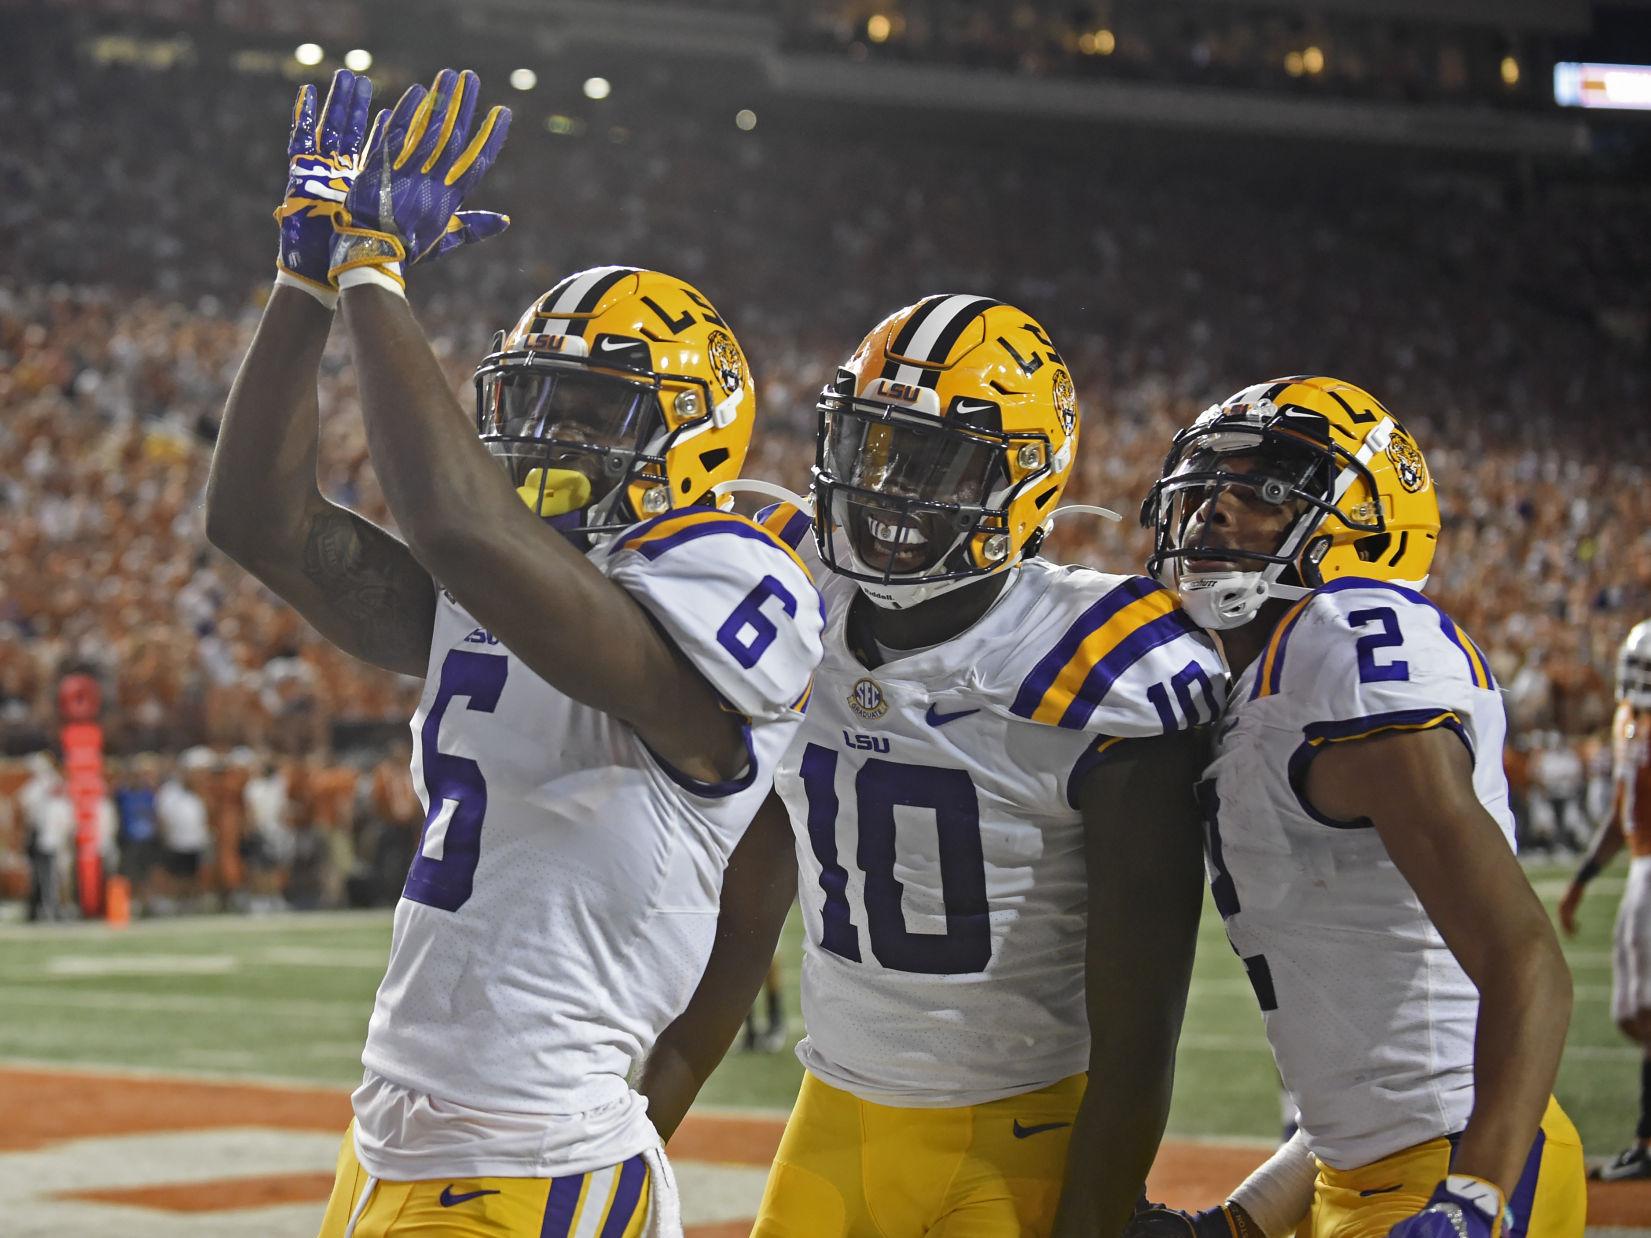 Rabalais: As LSU reaches the 800-win milestone, Tigers are looking for that special season